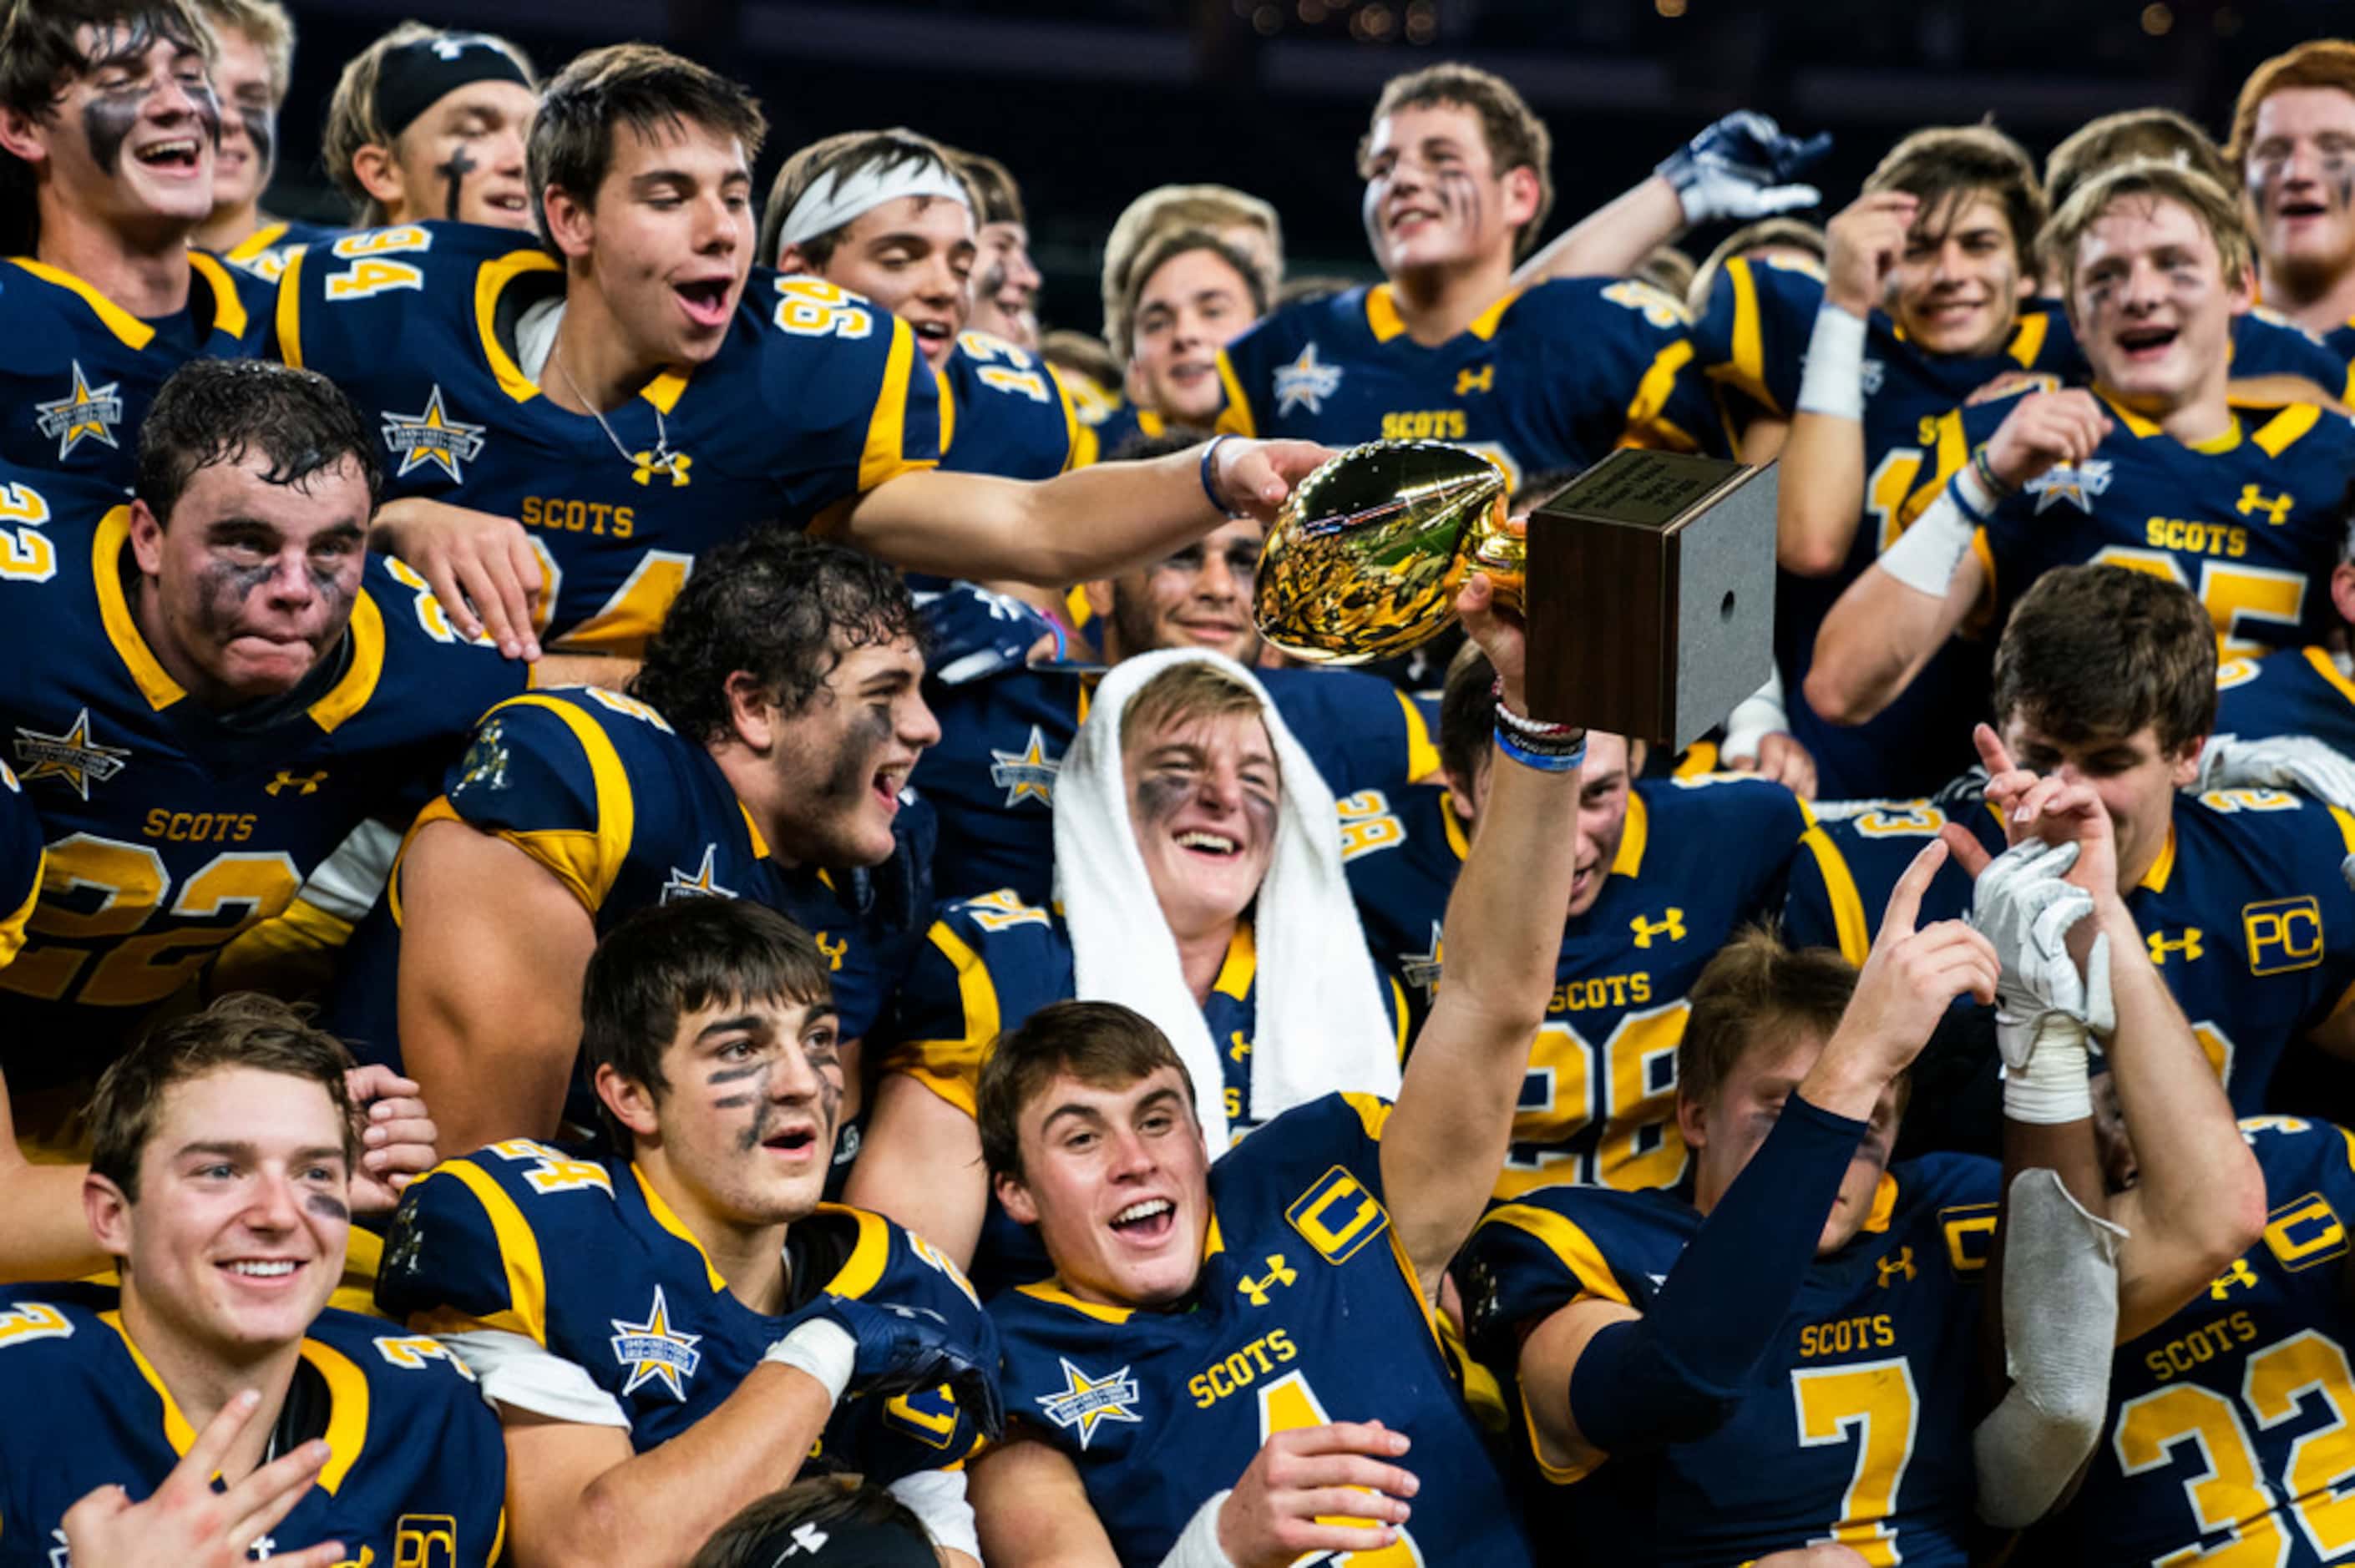 Highland Park football players celebrate a 63-28 win over Magnolia in a Class 5A Division I...